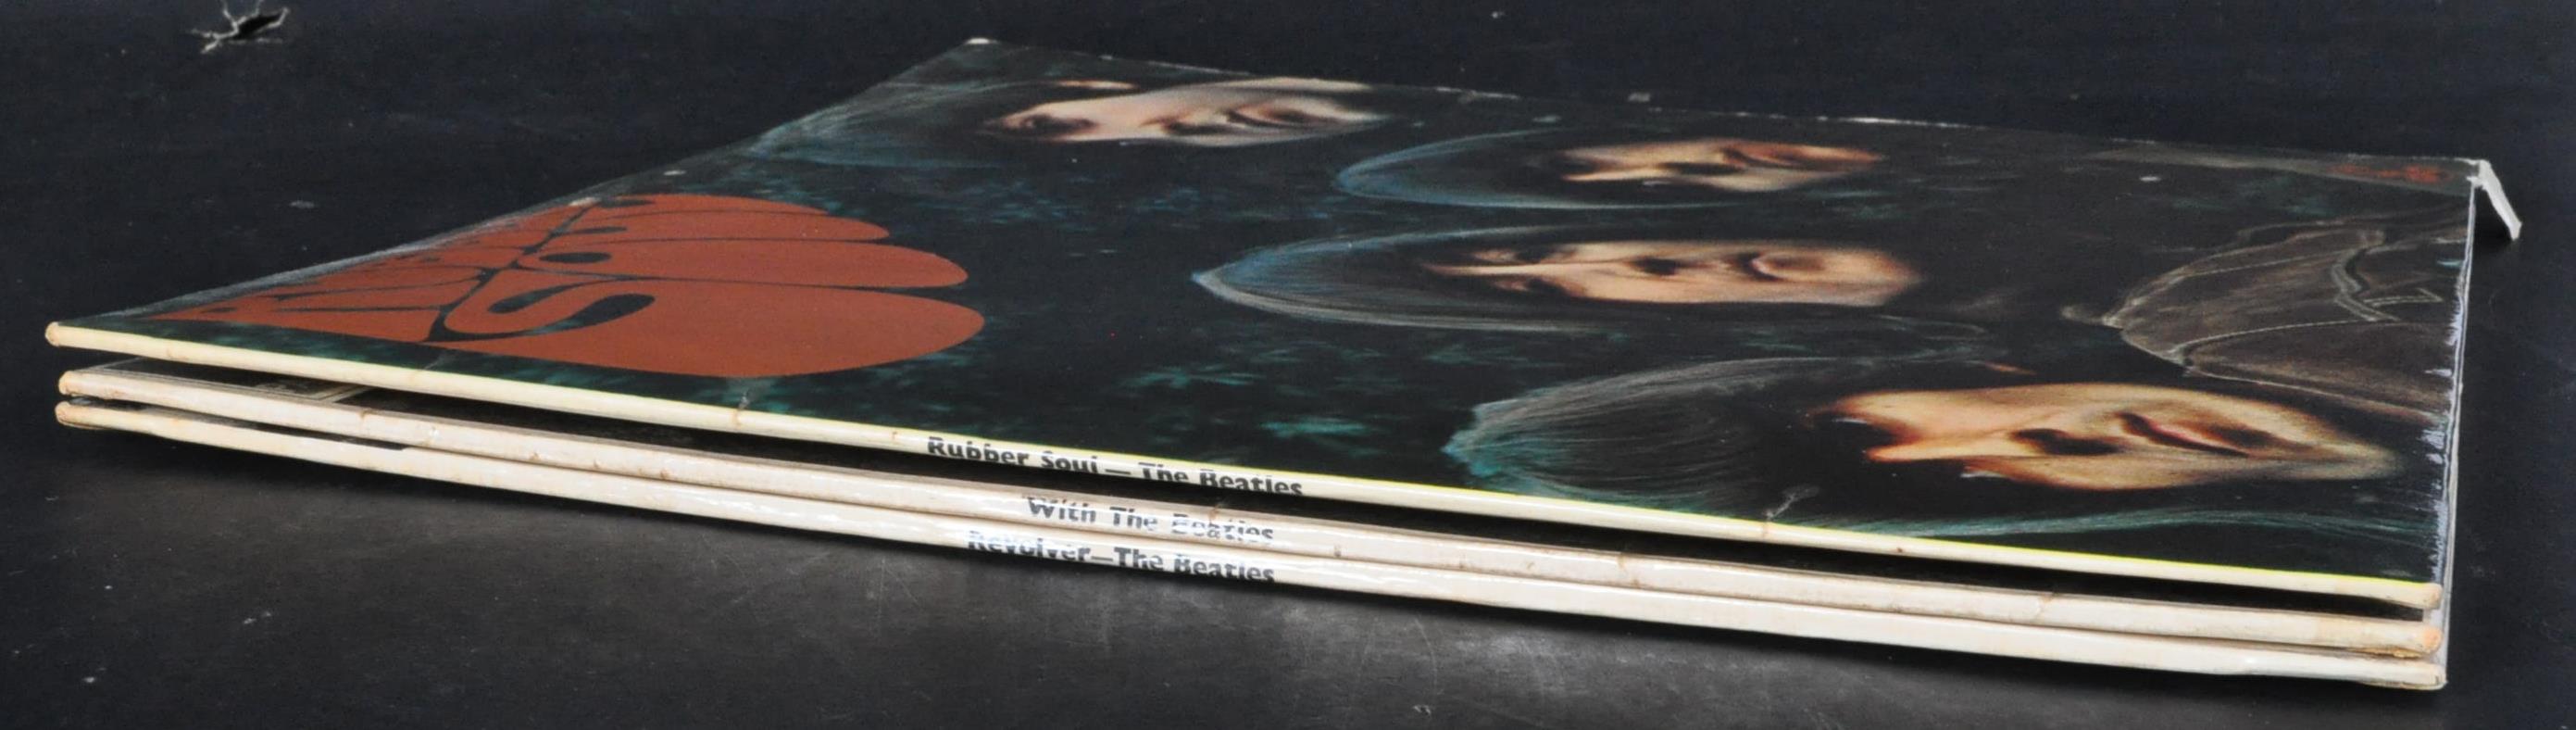 THE BEATLES - COLLECTION OF THREE VINYL RECORD ALBUMS - Image 3 of 3